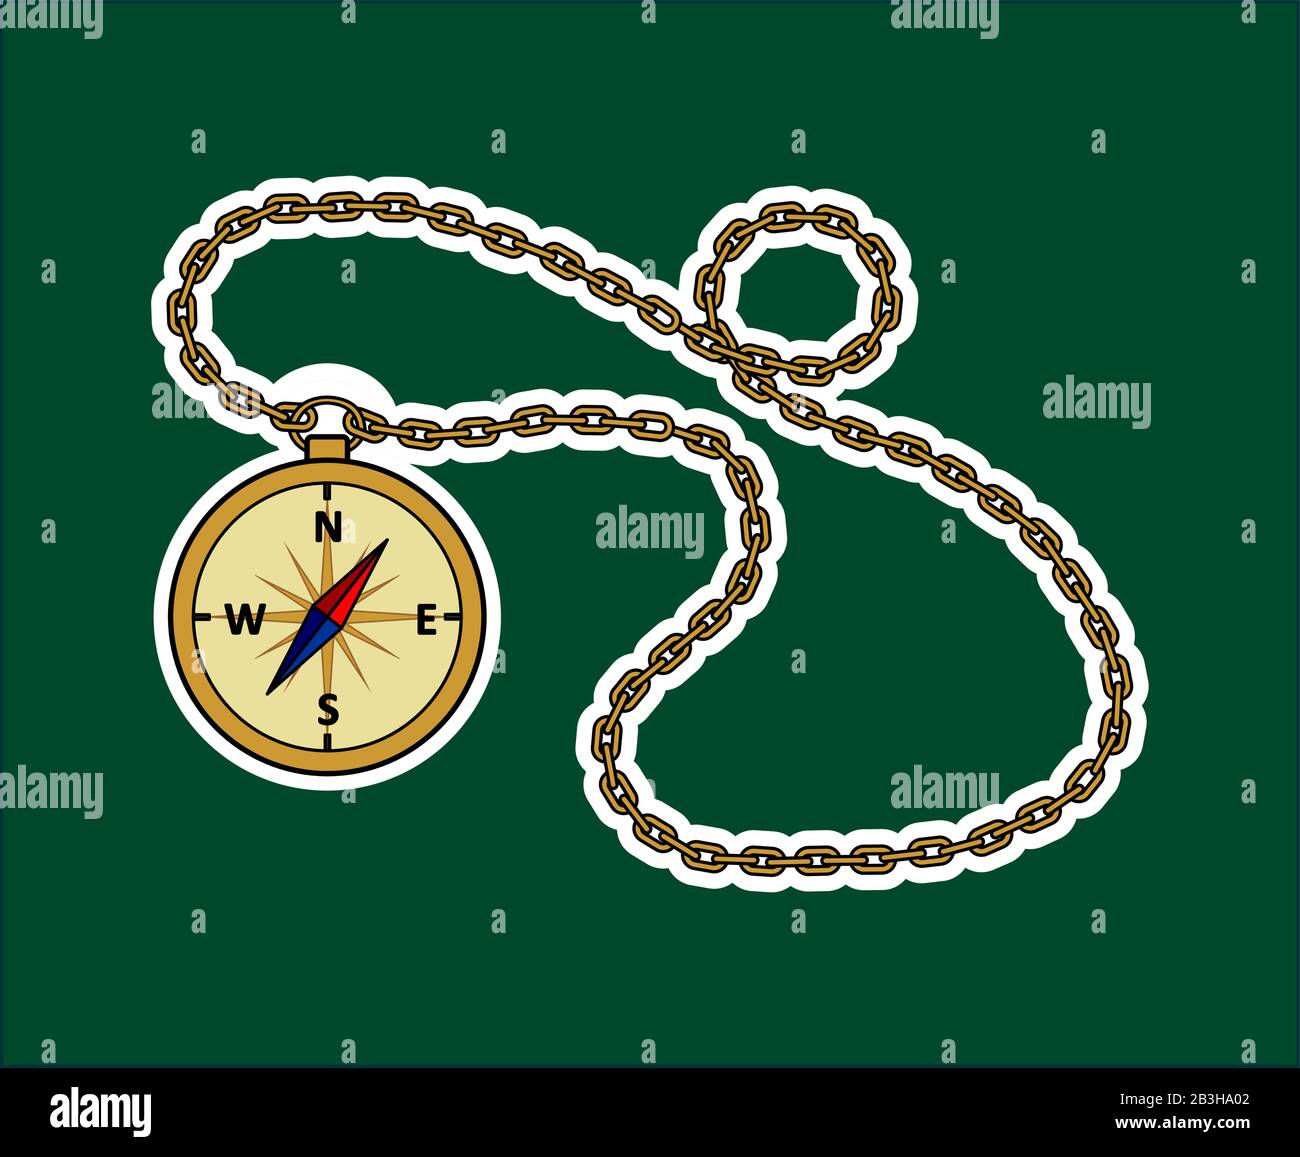 Vector Compass With Chain. Sticker In The Form Of A Vintage Compass On A Chain. Stock Vector